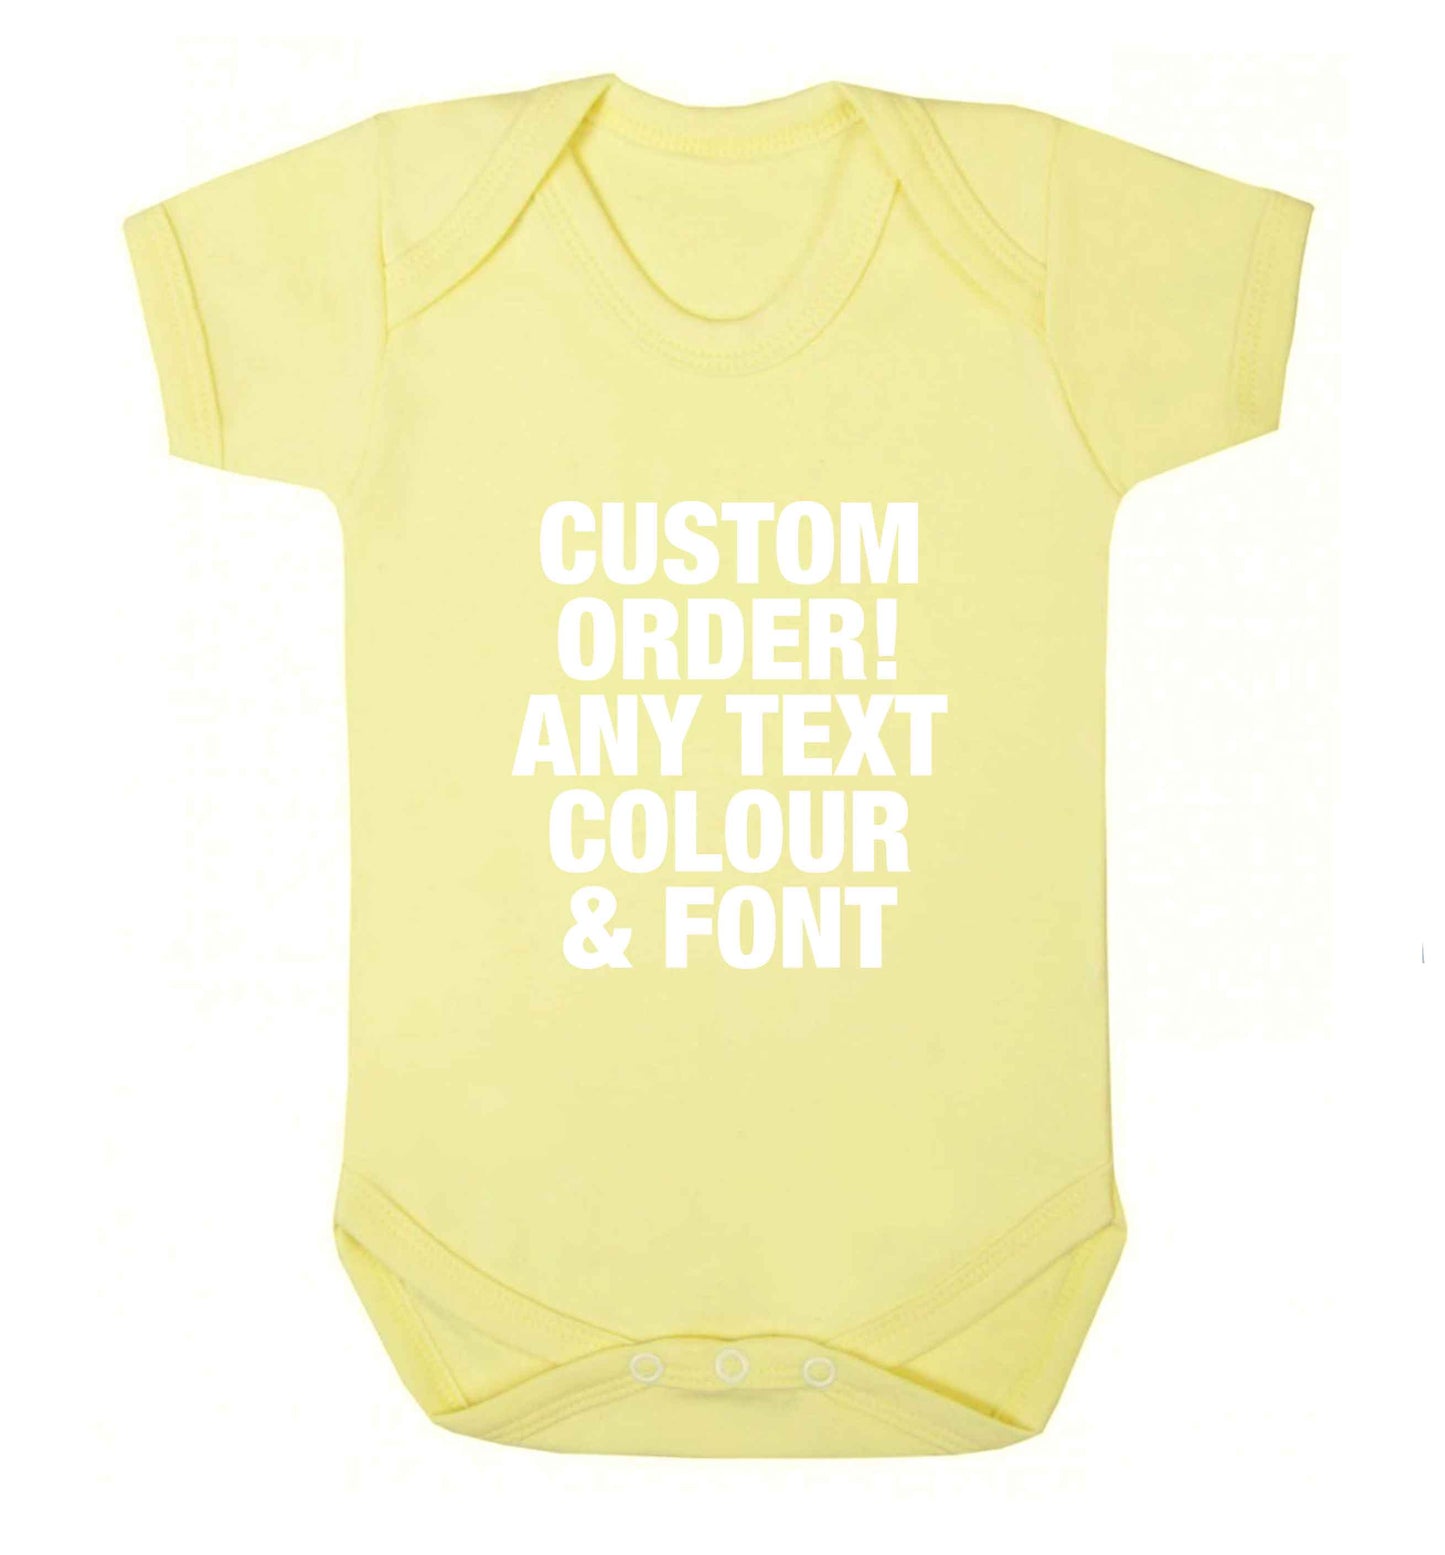 Custom order any text colour and font baby vest pale yellow 18-24 months